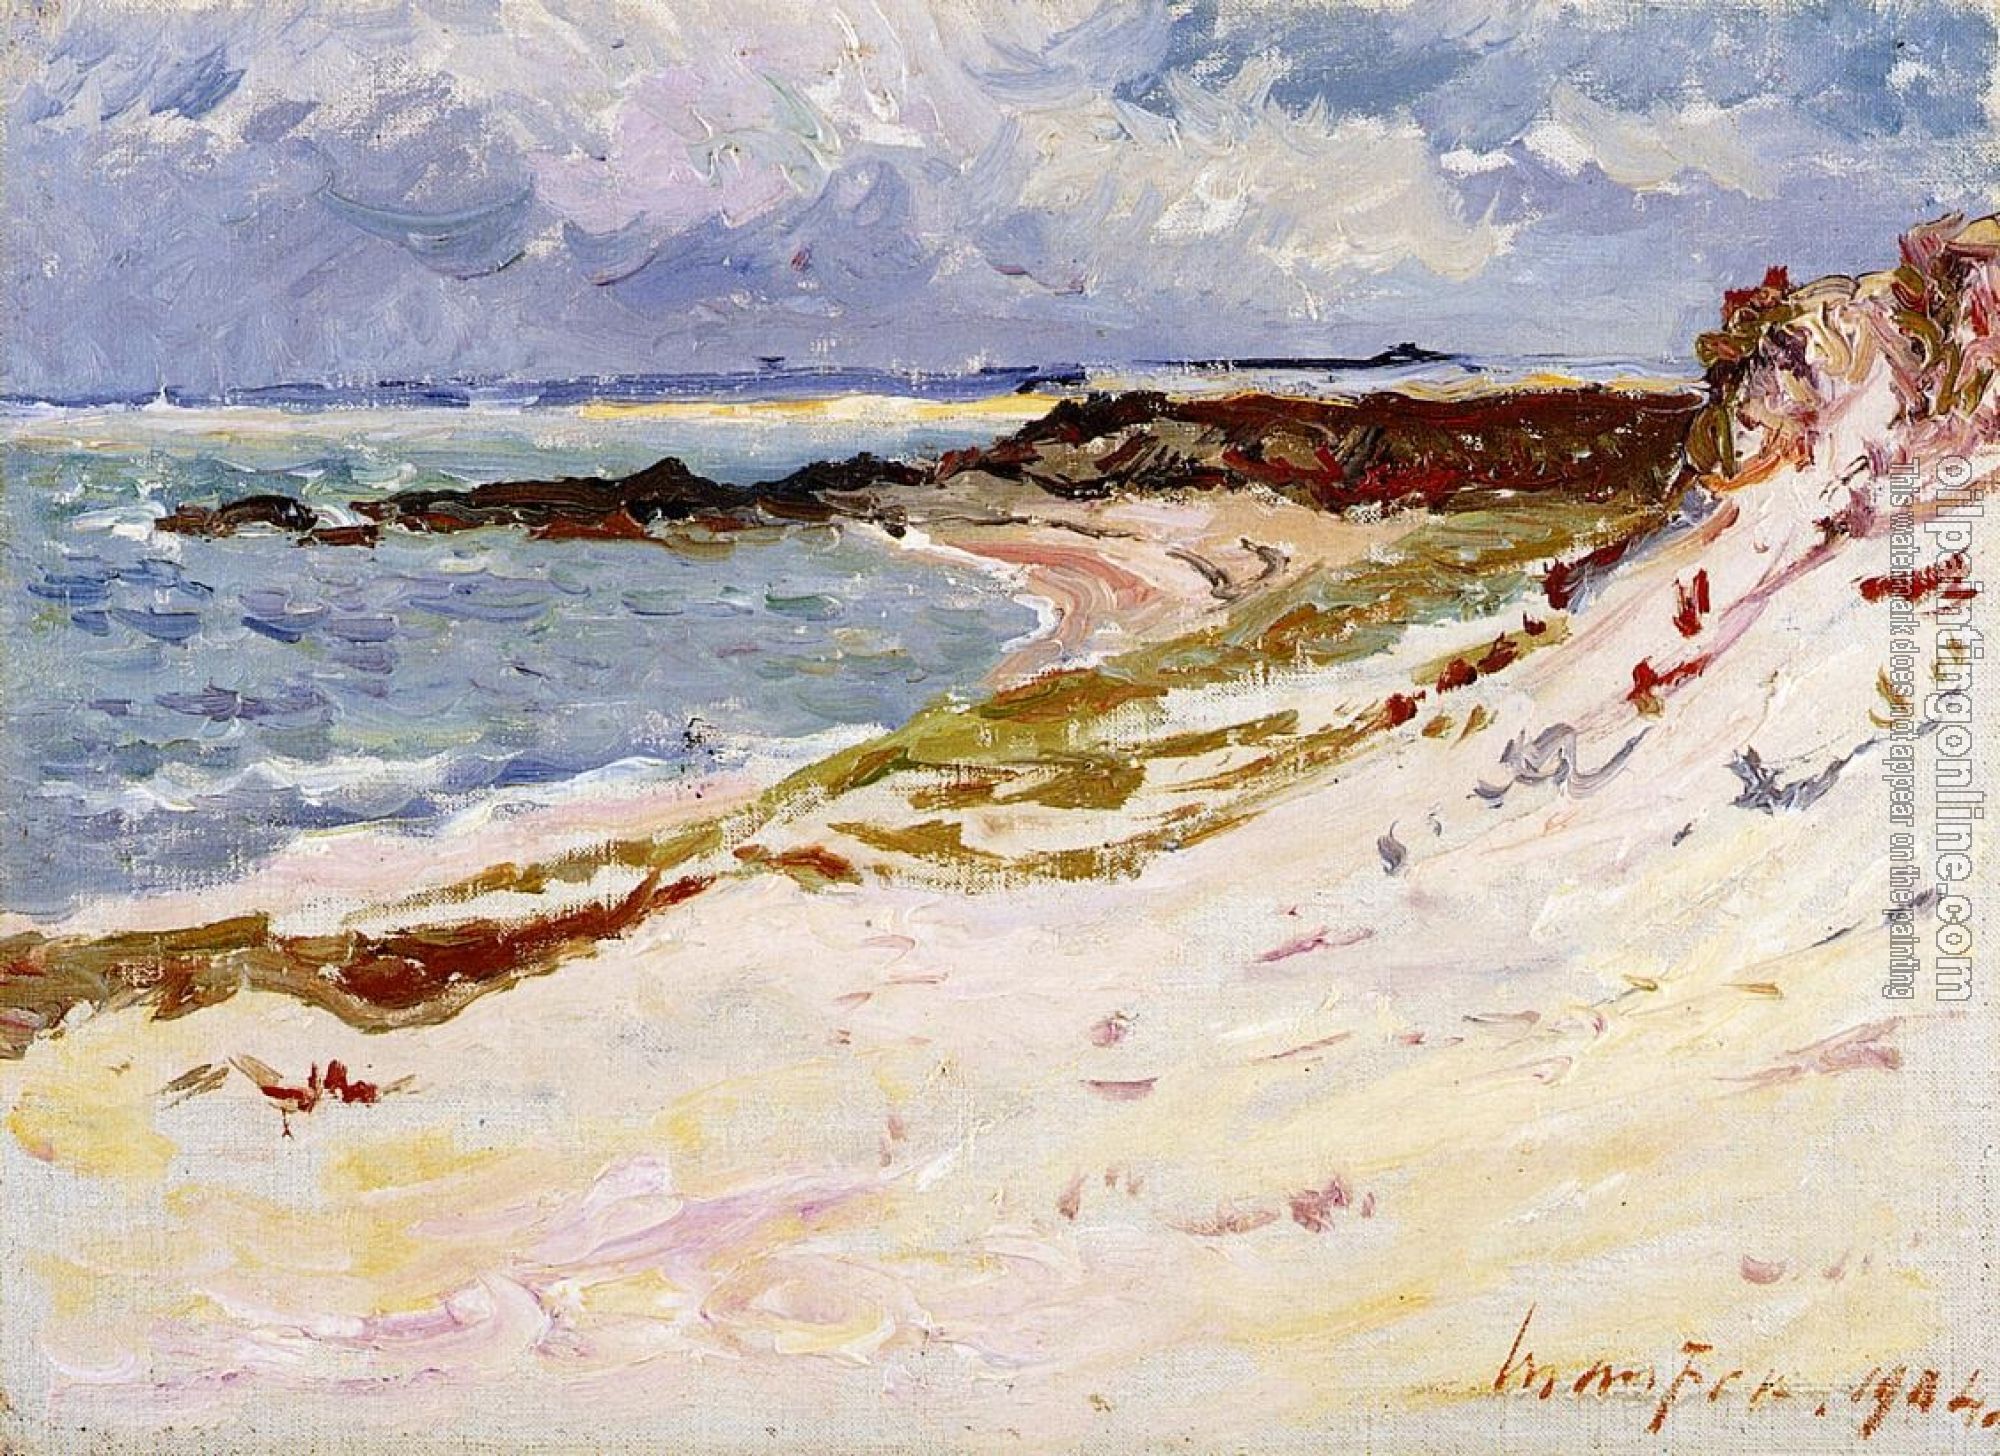 Maufra, Maxime - By the Sea